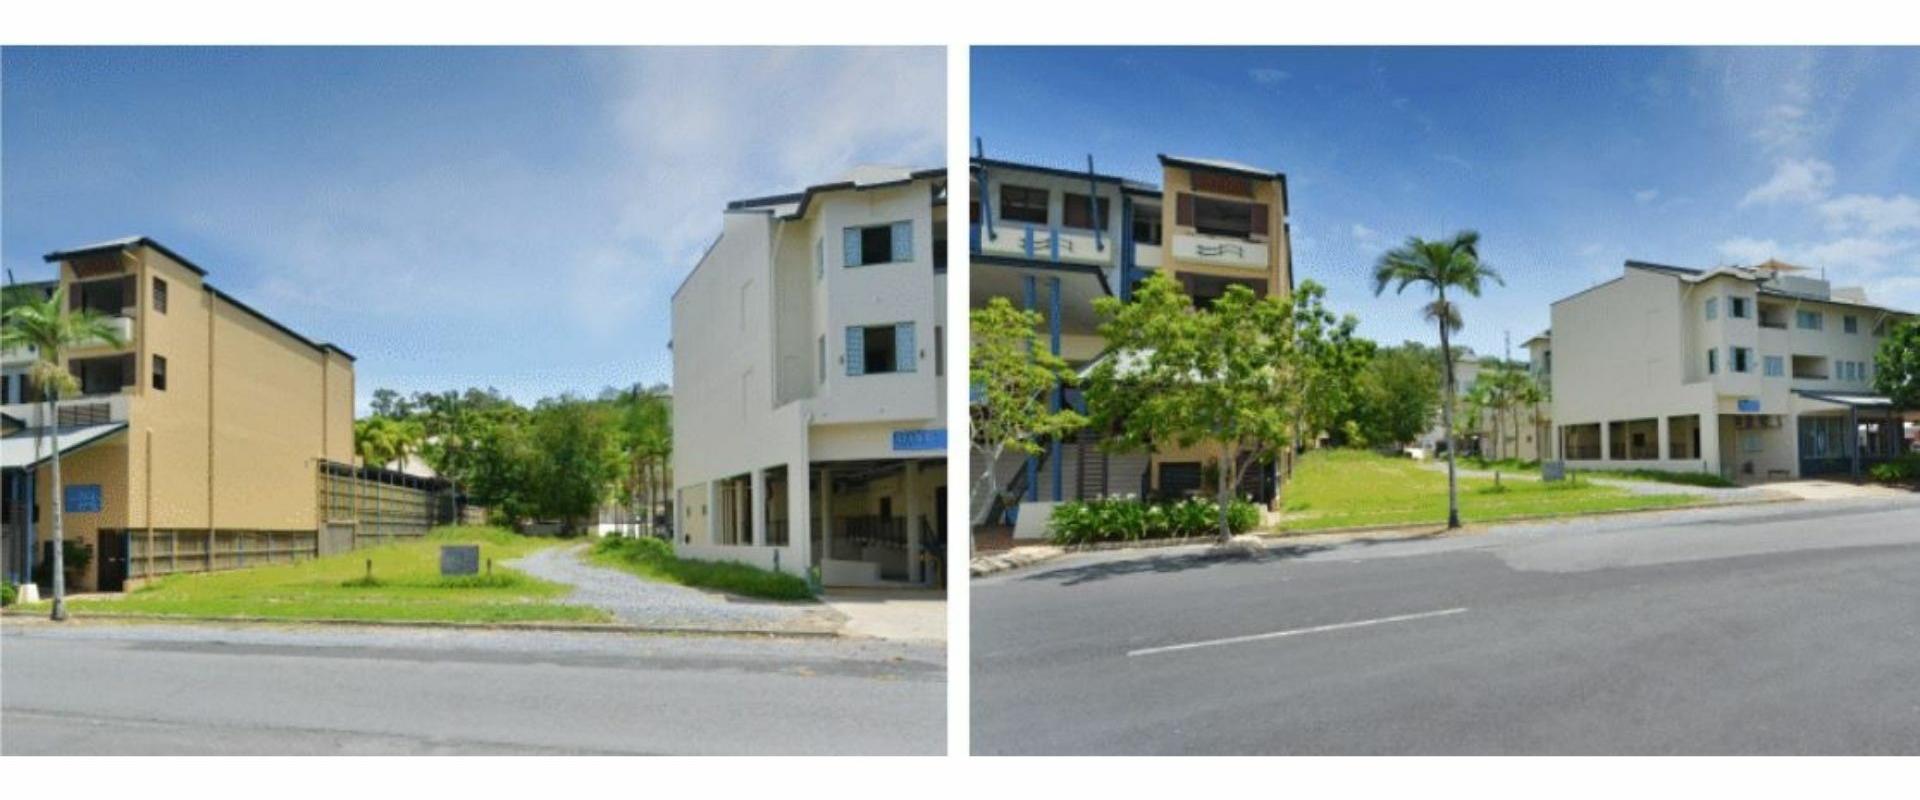 Vacant Development Land in Port Douglas With Approved Plans For Three Level 36 Room Boutique Hotel